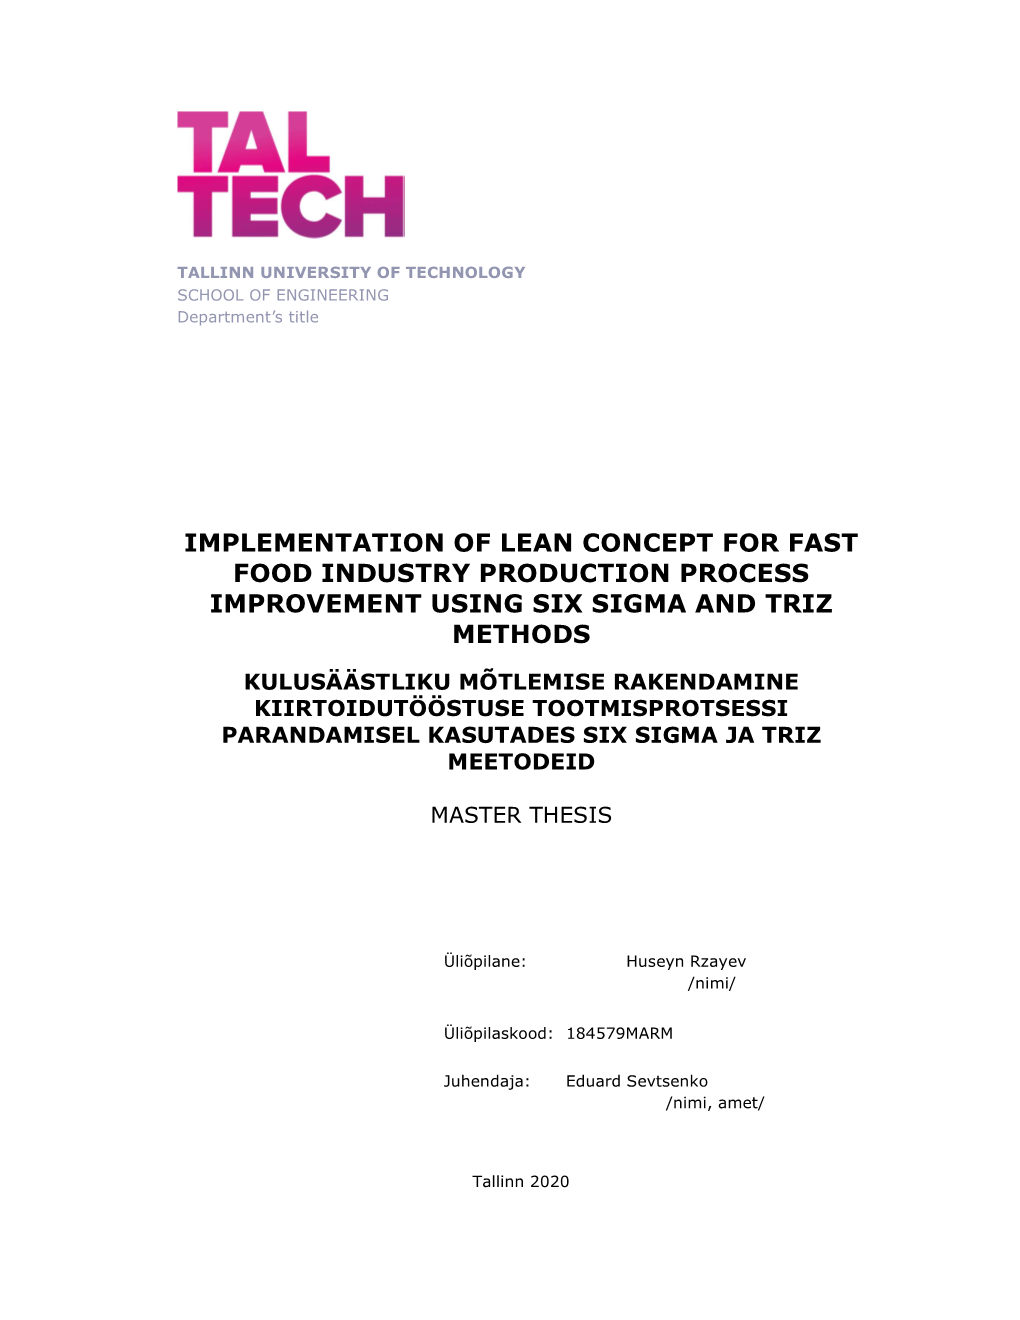 Implementation of Lean Concept for Fast Food Industry Production Process Improvement Using Six Sigma and Triz Methods